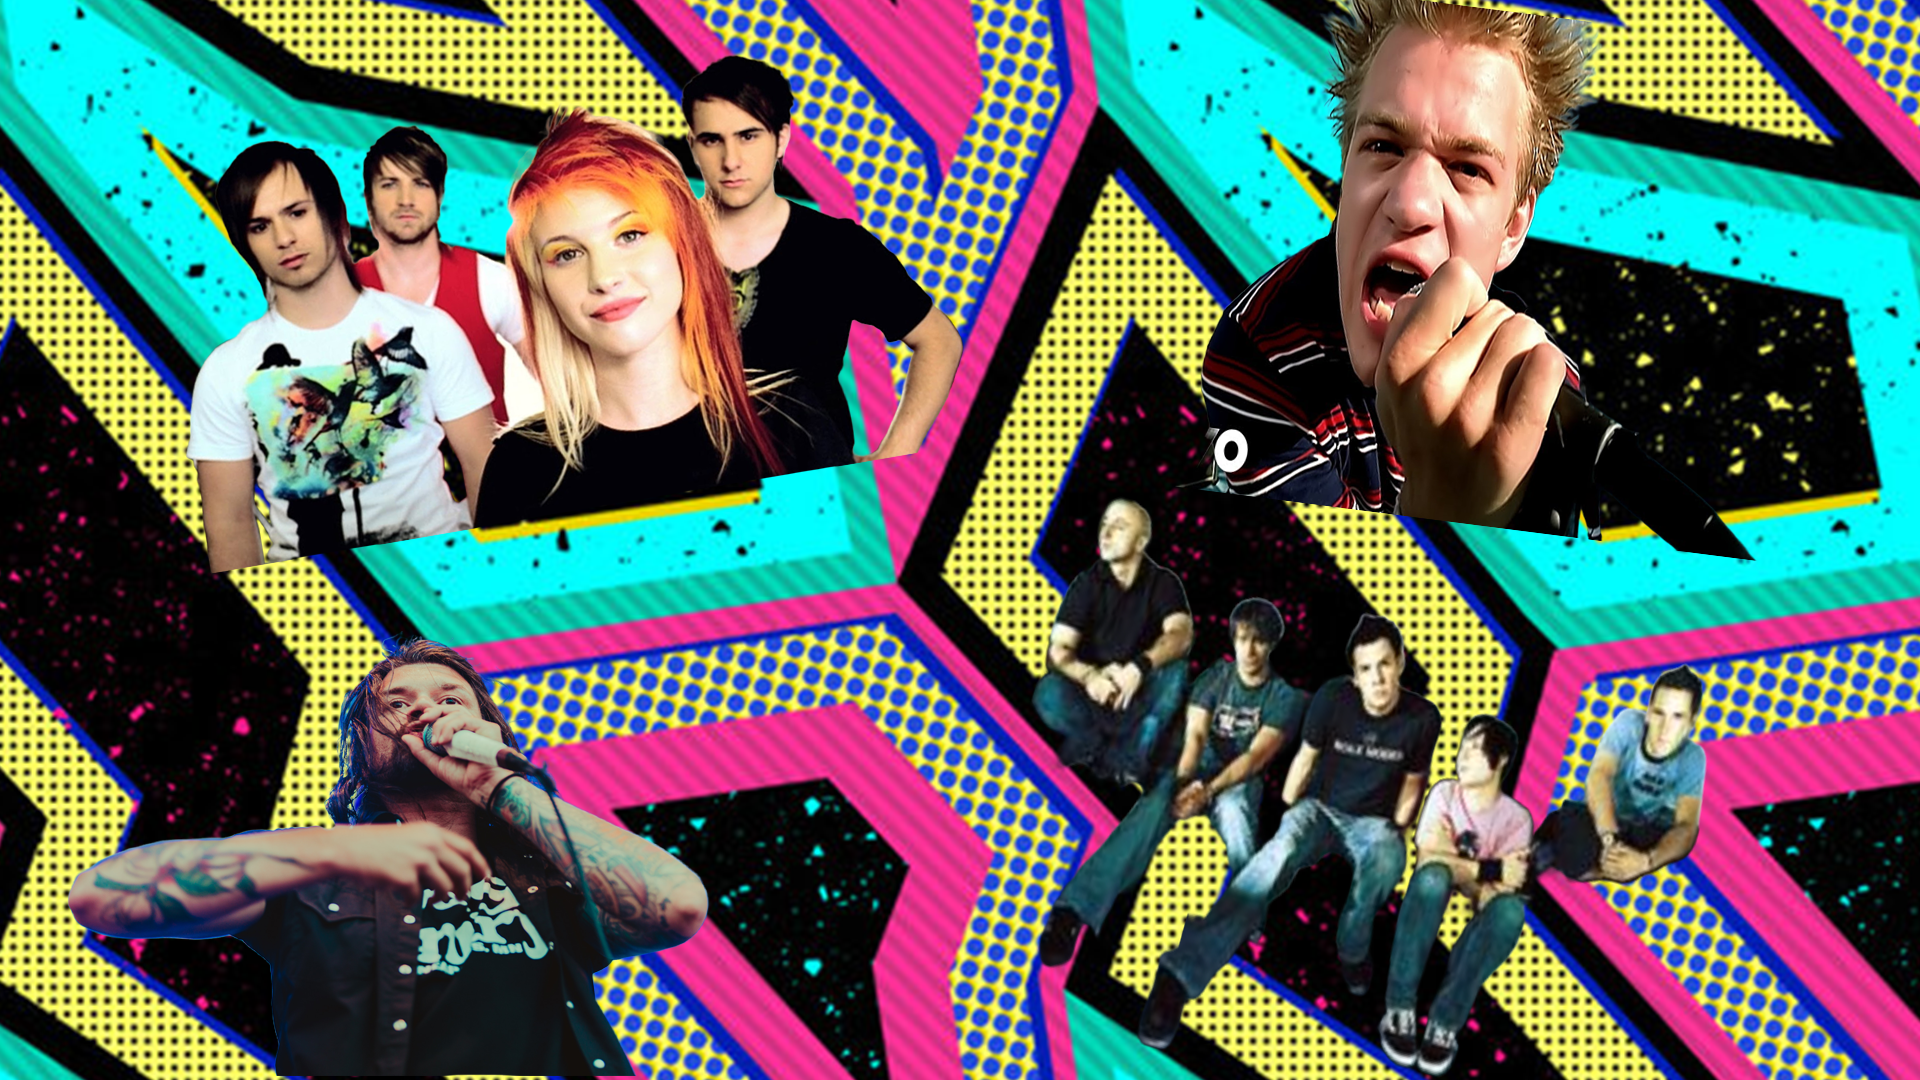 Can You Guess the 2000s Pop-Punk Song from a Lyric?